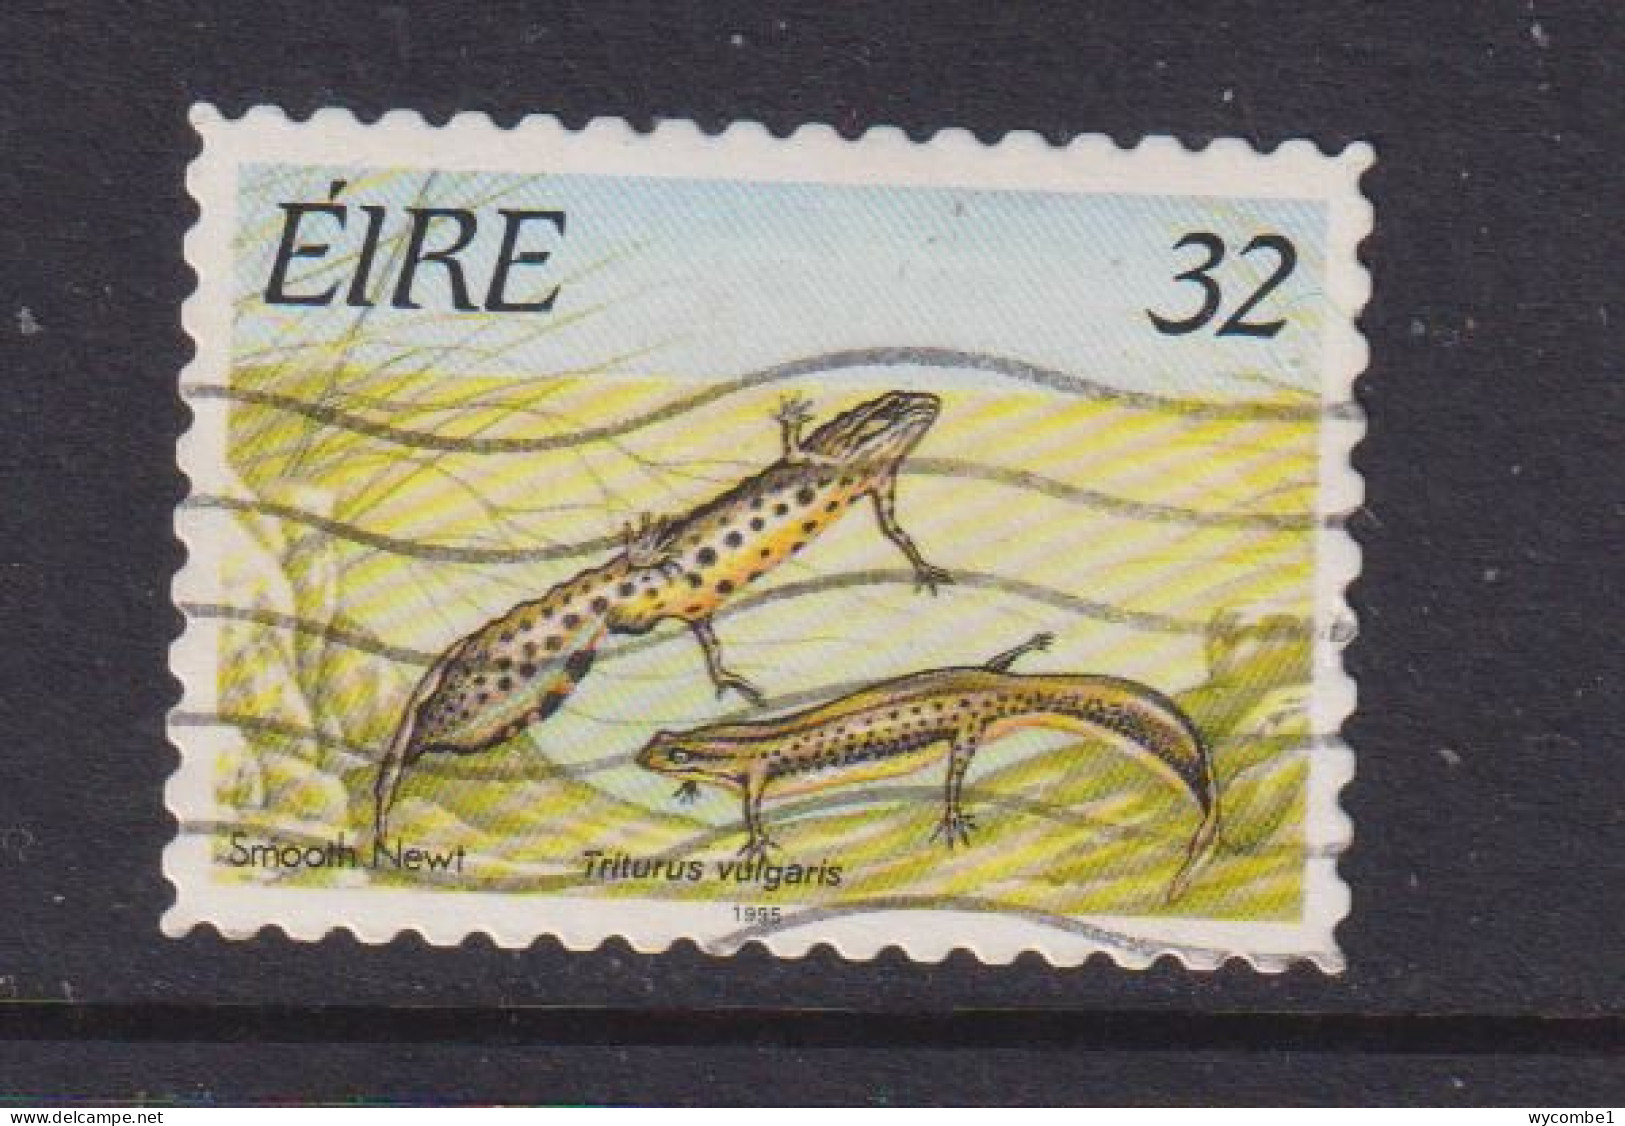 IRELAND - 1995  Reptiles And Amphibians  32p  Used As Scan - Oblitérés